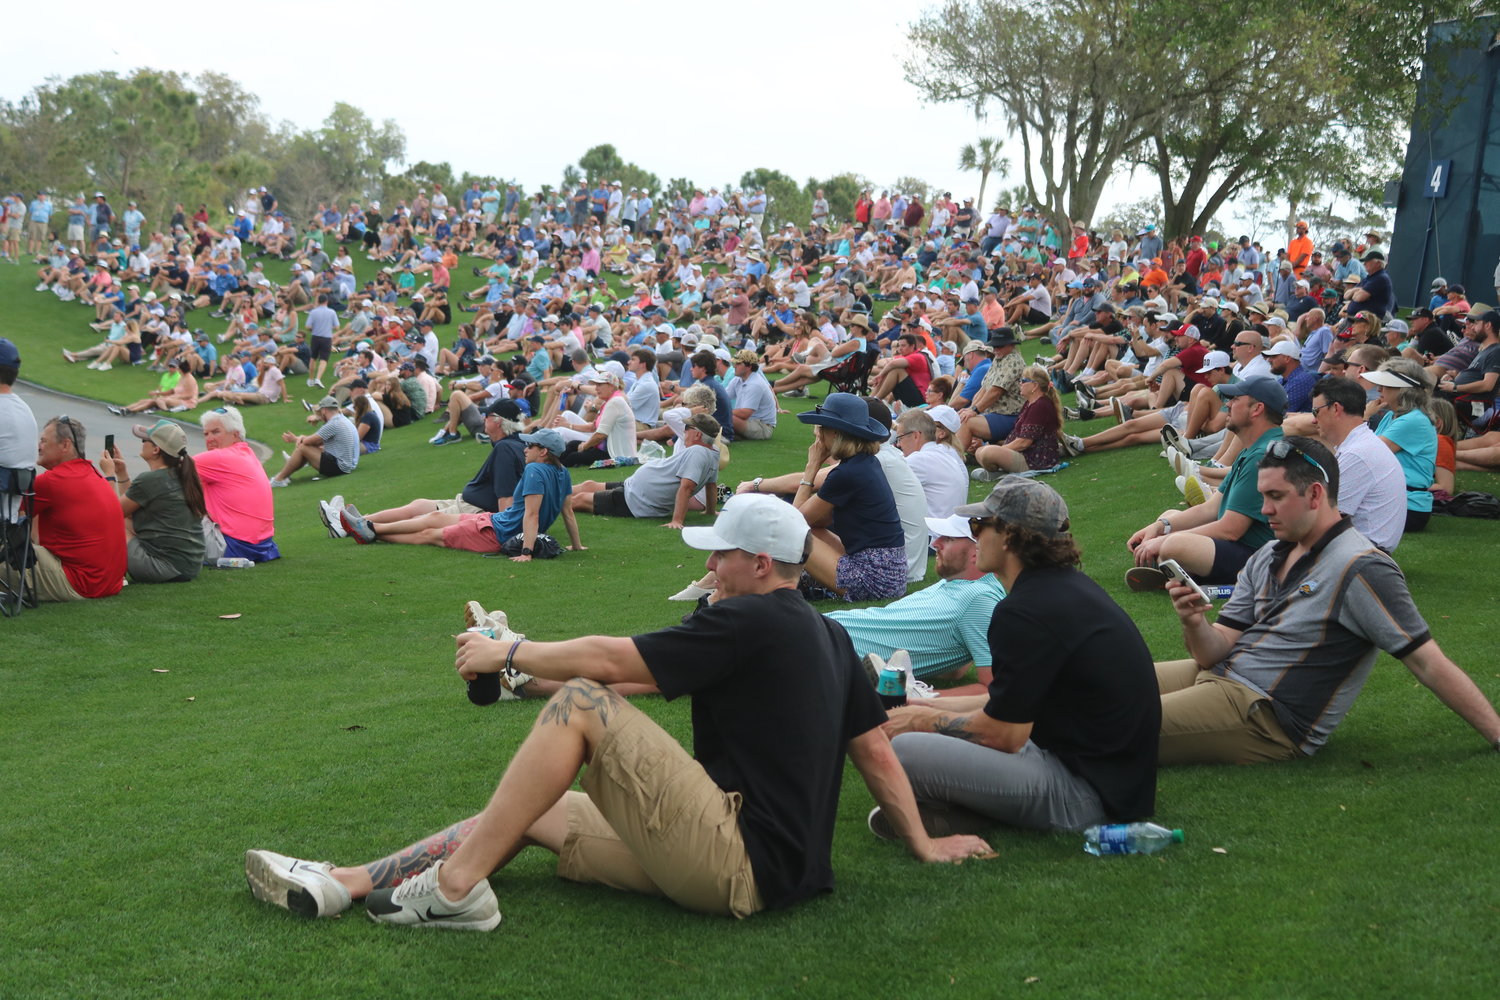 Large crowds gathered around several holes during the second round.